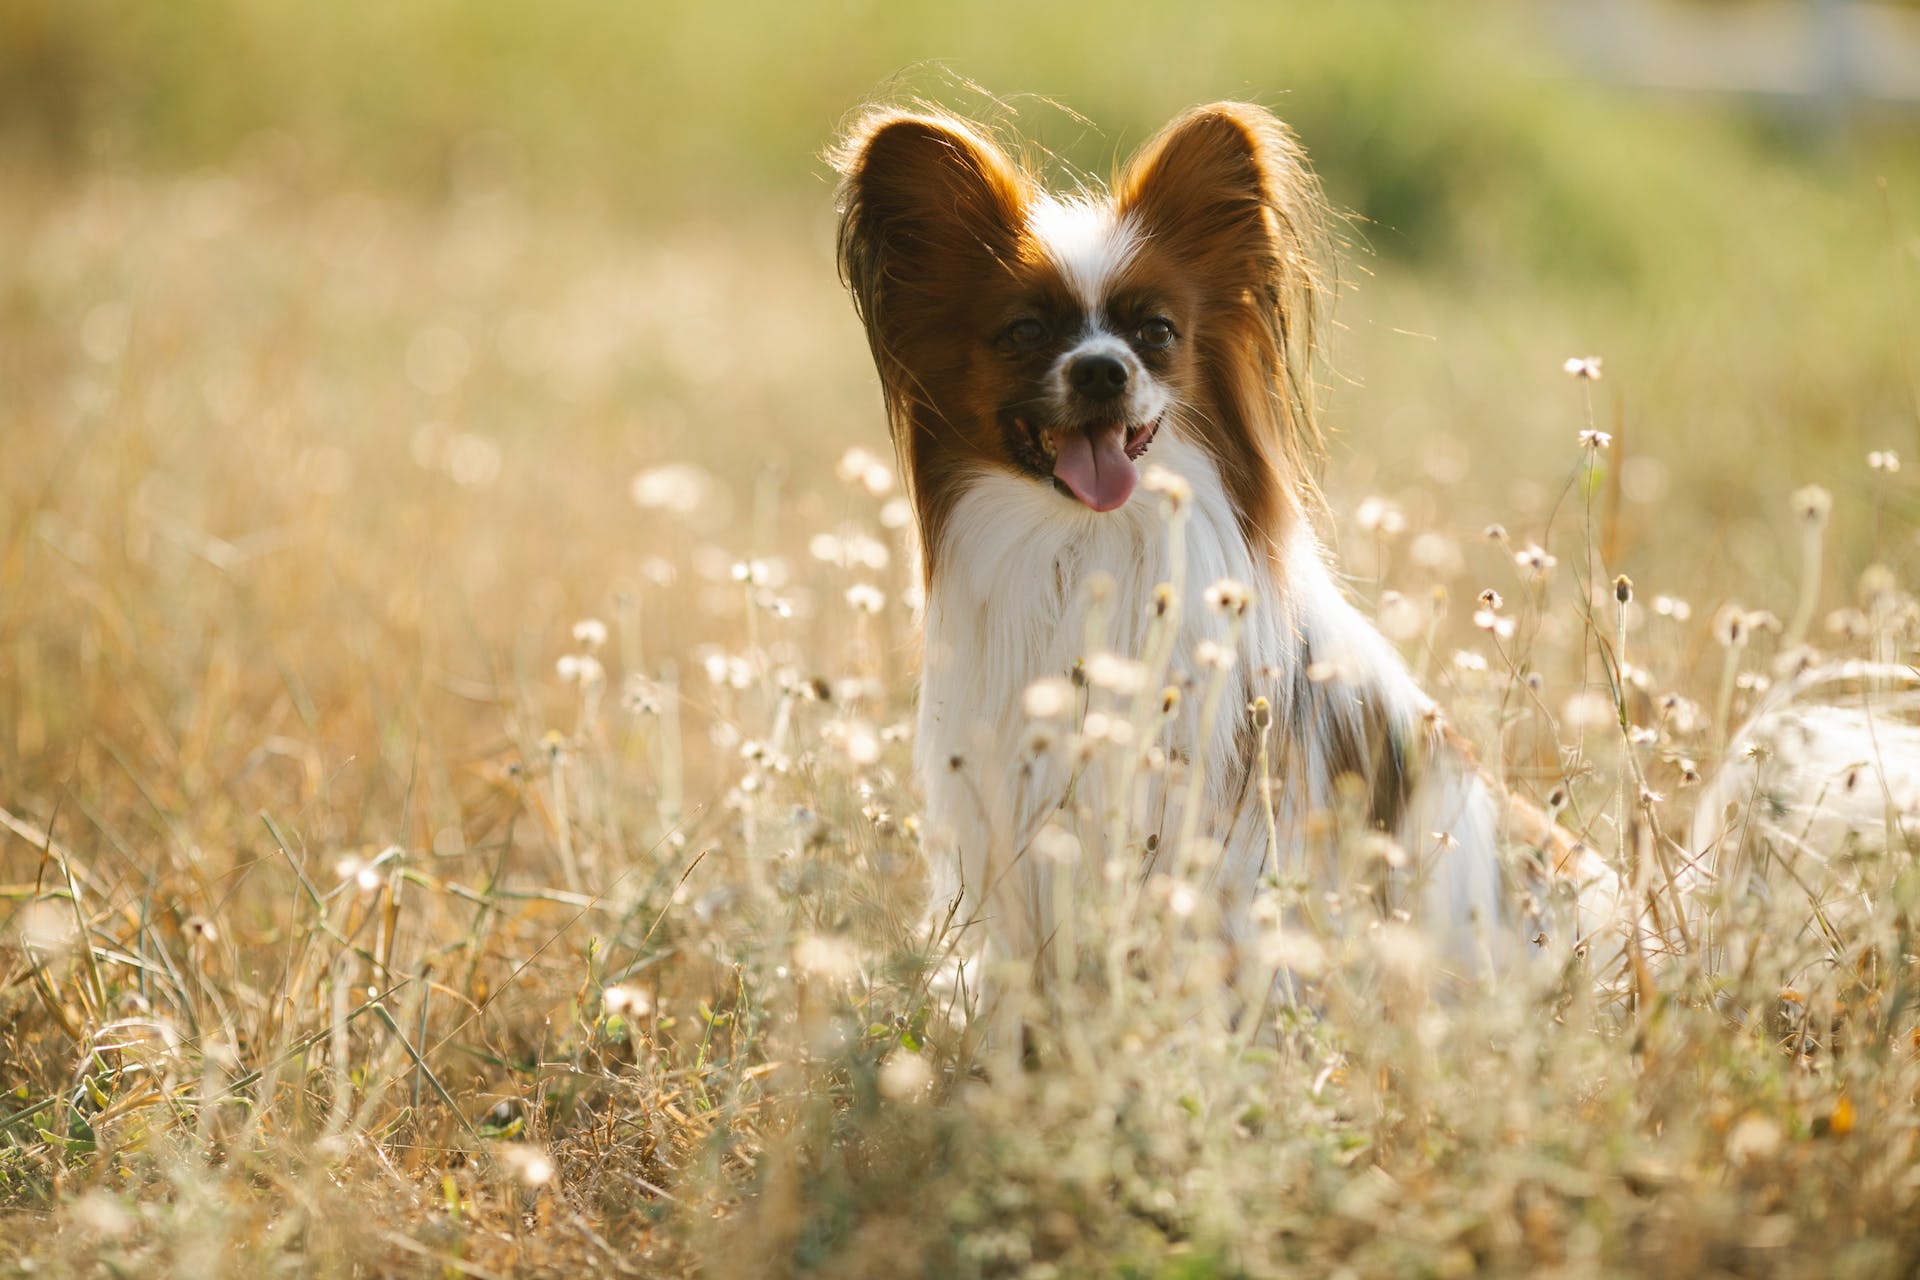 A Papillon dog sitting in a sunny field outdoors